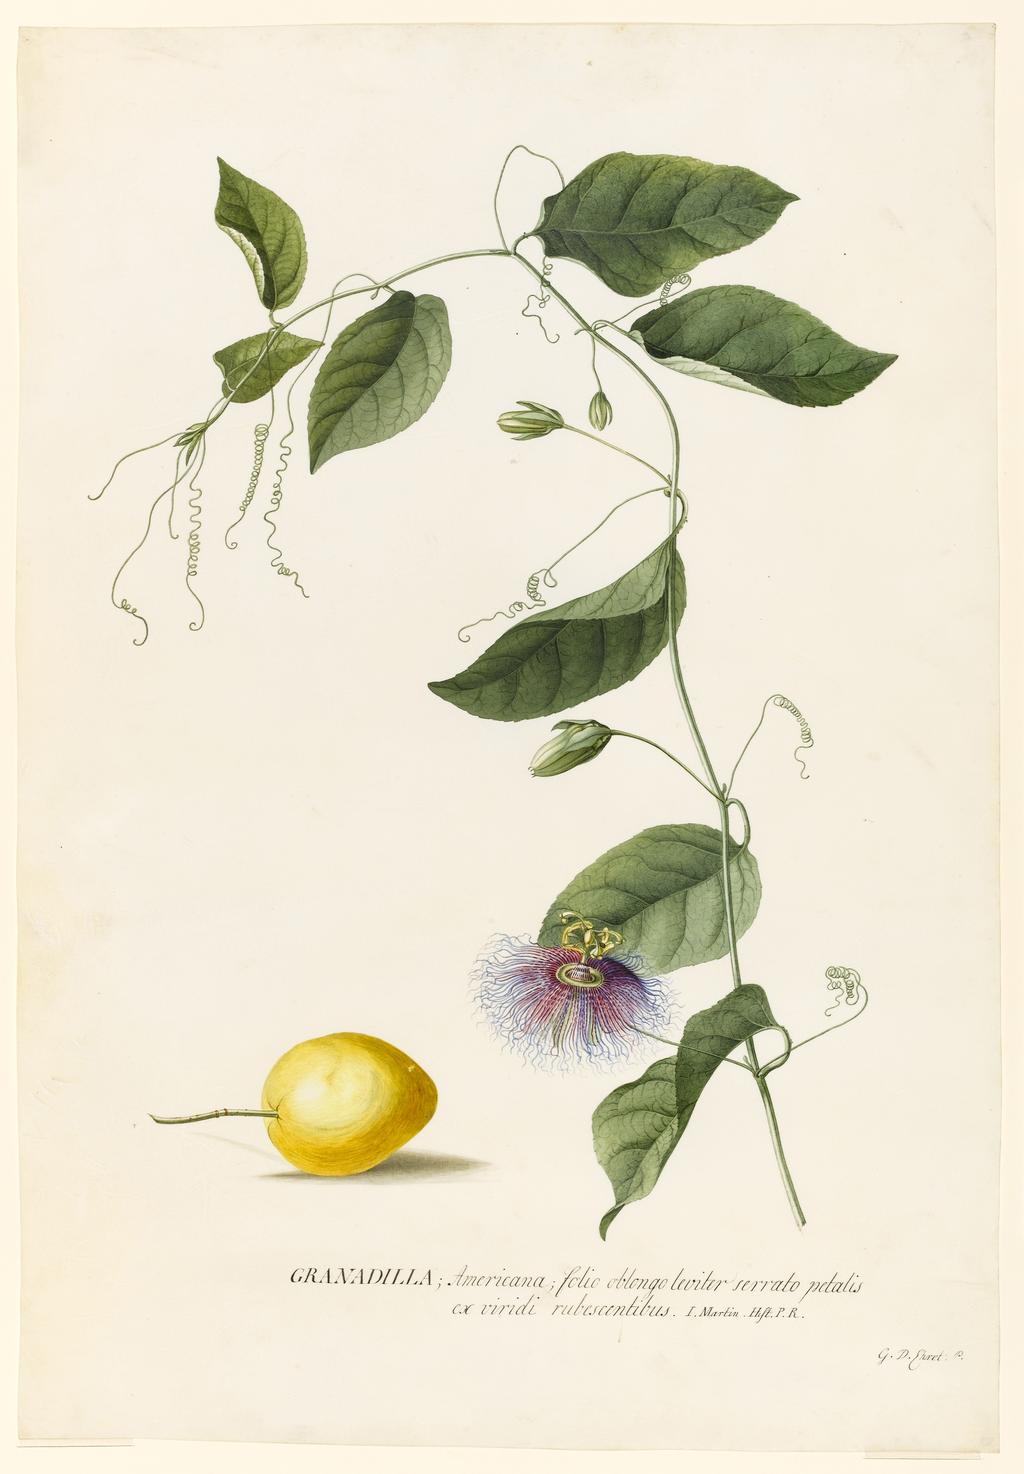 An image of Title/s: Granadilla Americana (Passiflora) 
Maker/s: Ehret, Georg Dionysius (draughtsman) [ULAN info: German artist, 1710-1770]
Description: Study of single flowering stem with buds, leaves and curled tendrils and lower left detail study of yellow fruit. Removed from album and mounted separately. 
Technique Description: watercolour and some bodycolour on vellum 
Dimensions: height: 537 mm, width: 372 mm
 

 
